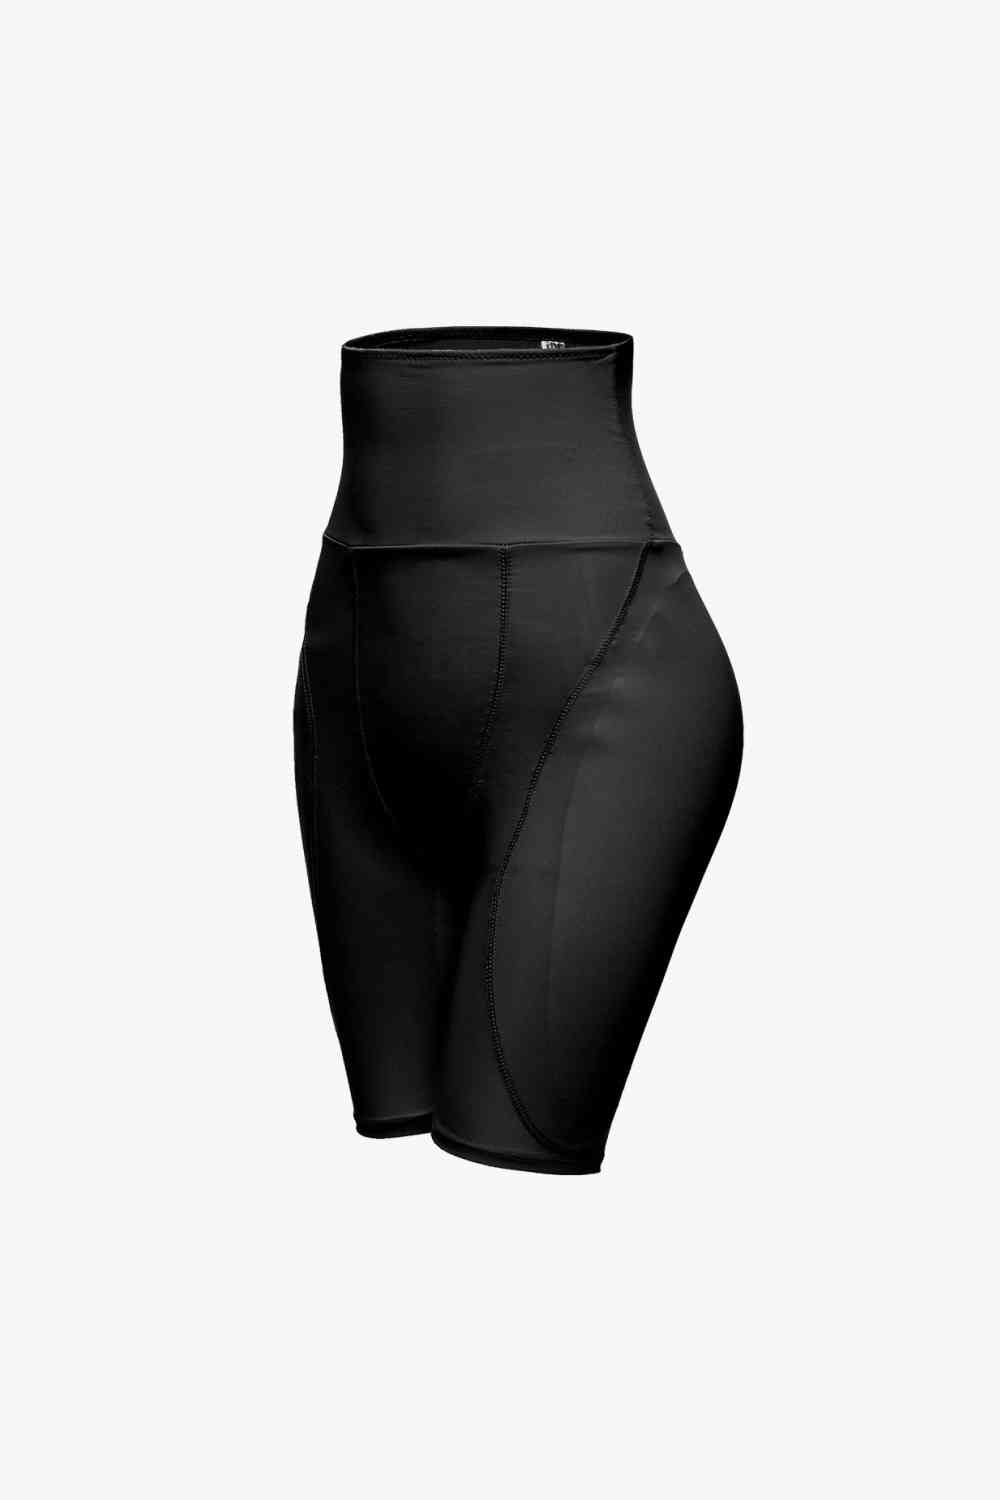 Full Size High Waisted Pull-On Shaping Shorts